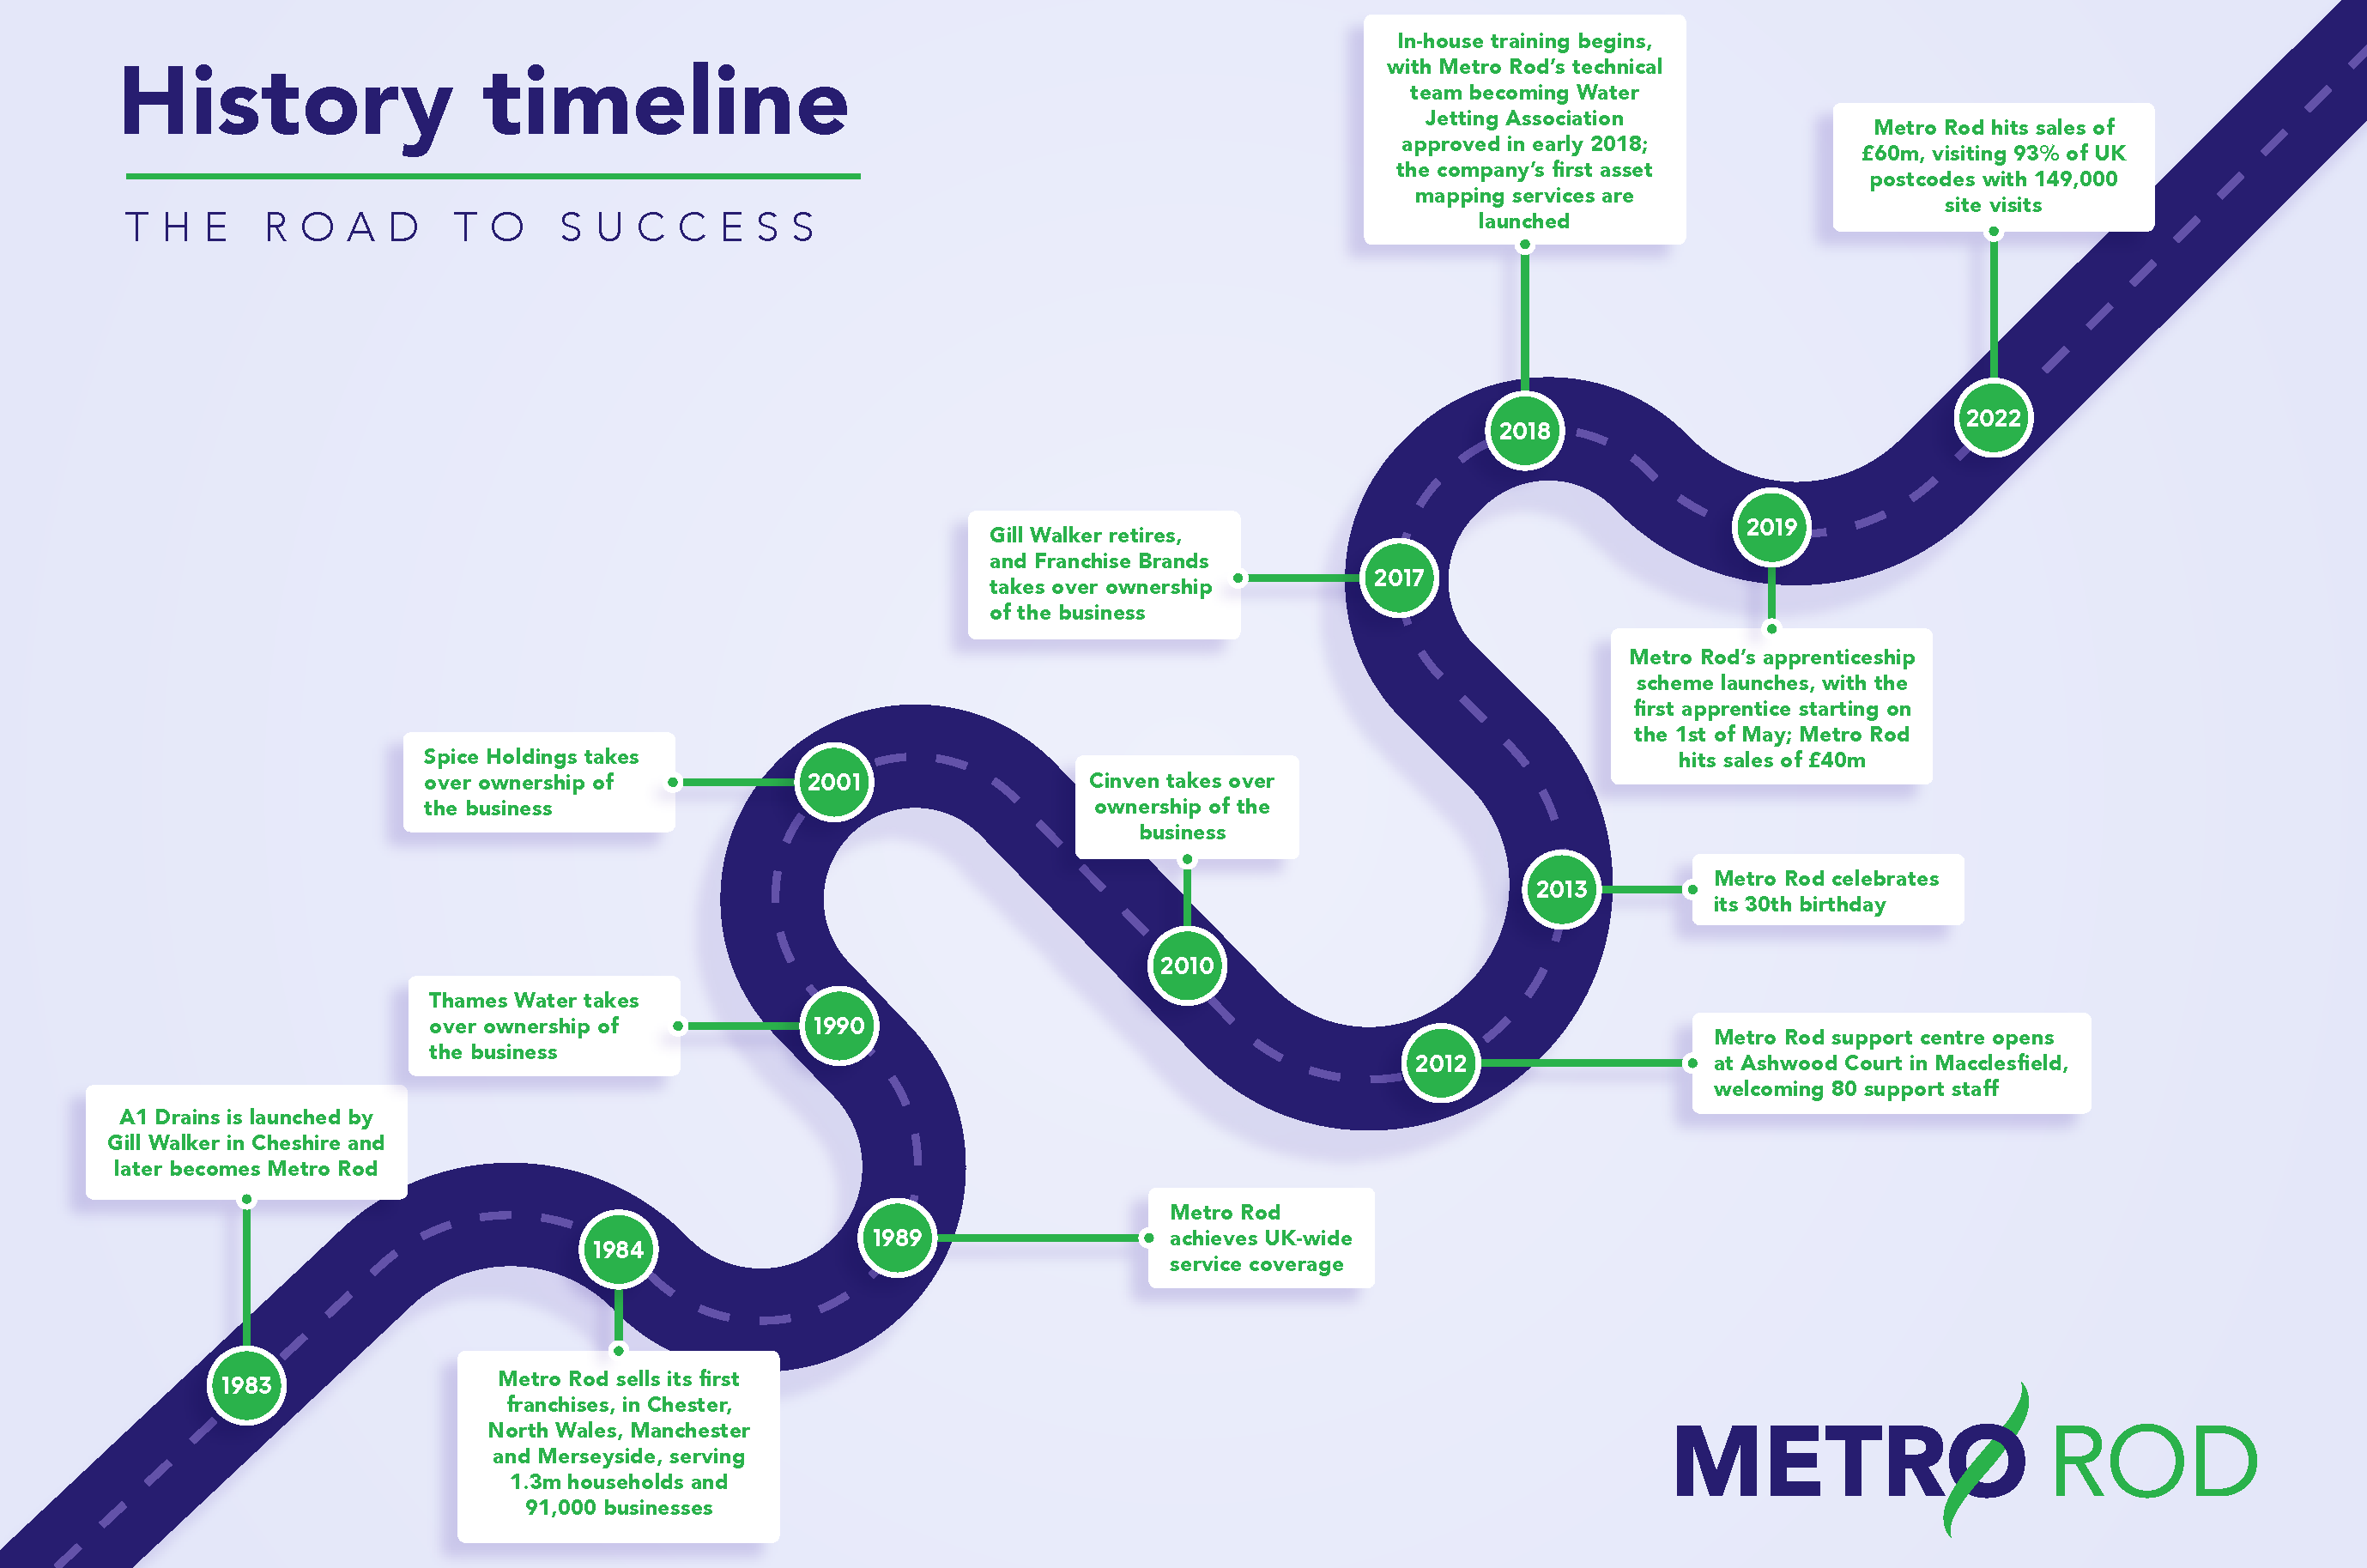 A Roadmap showing the history of Metro Rod over 40 years.